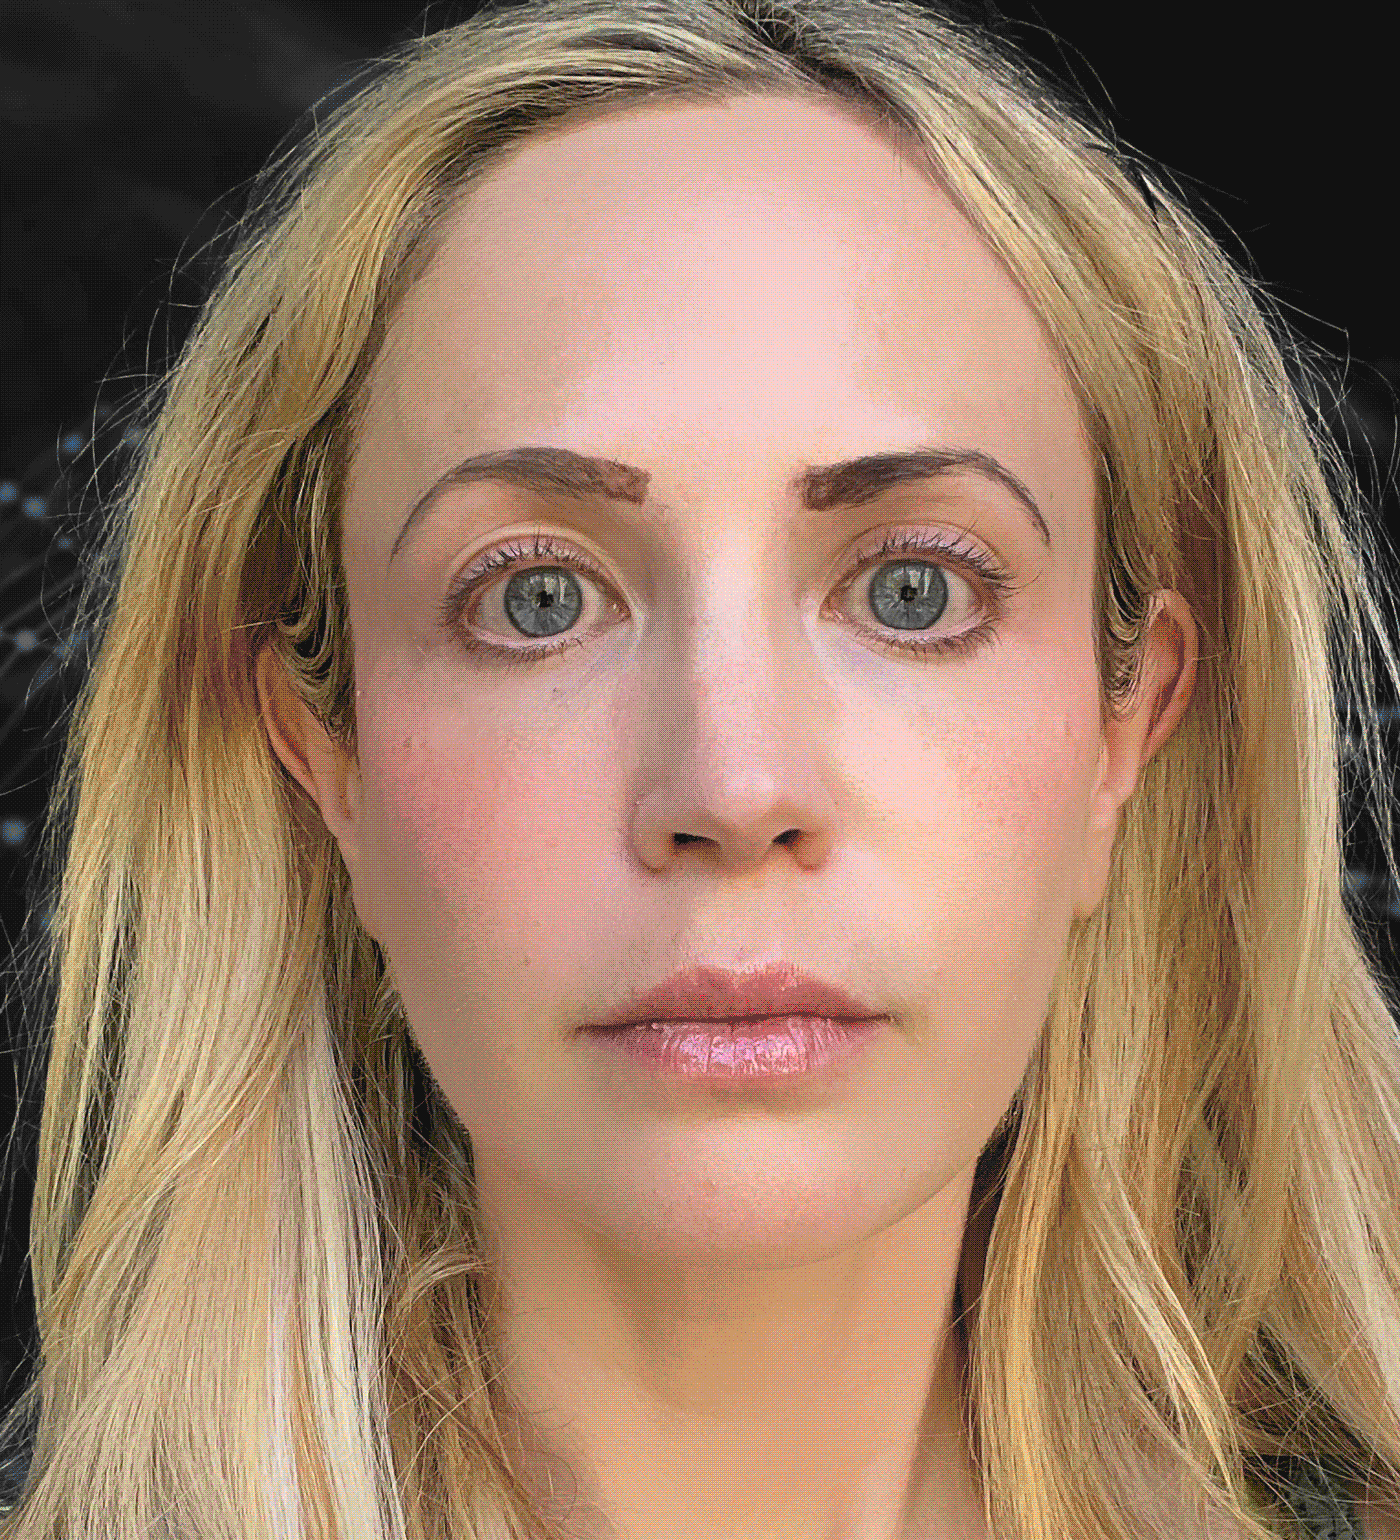 A selfie of the author Zara Stone, overlaid with results from Perfect Corp.’s AI Personality Finder demo. Art by Clark Miller